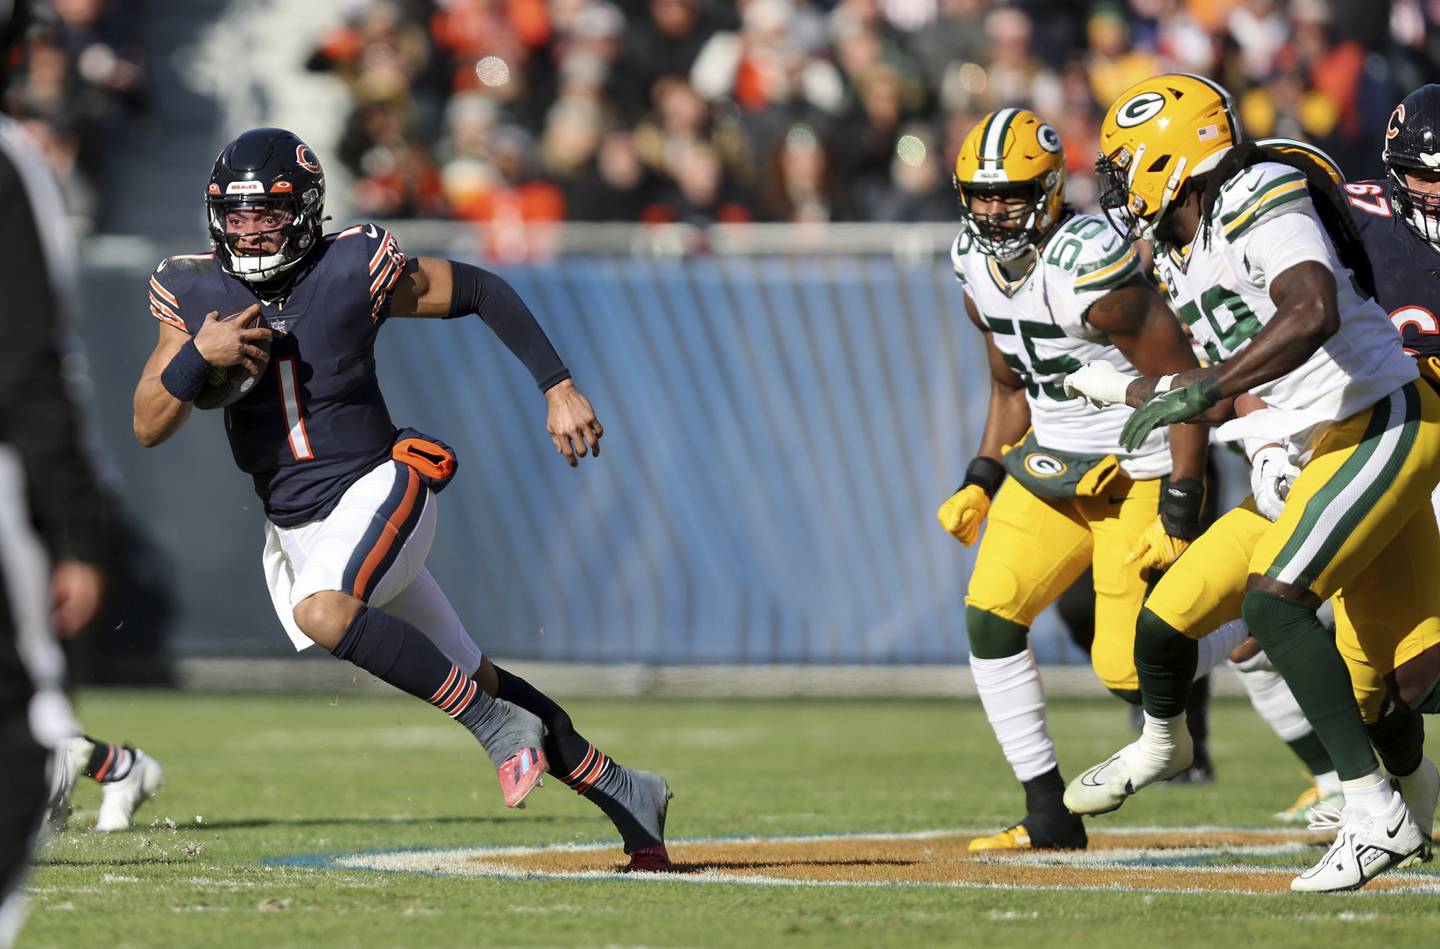 Bears quarterback Justin Fields breaks free for a long touchdown run in the first quarter against the Packers on Sunday, Dec. 4, 2022, at Soldier Field.